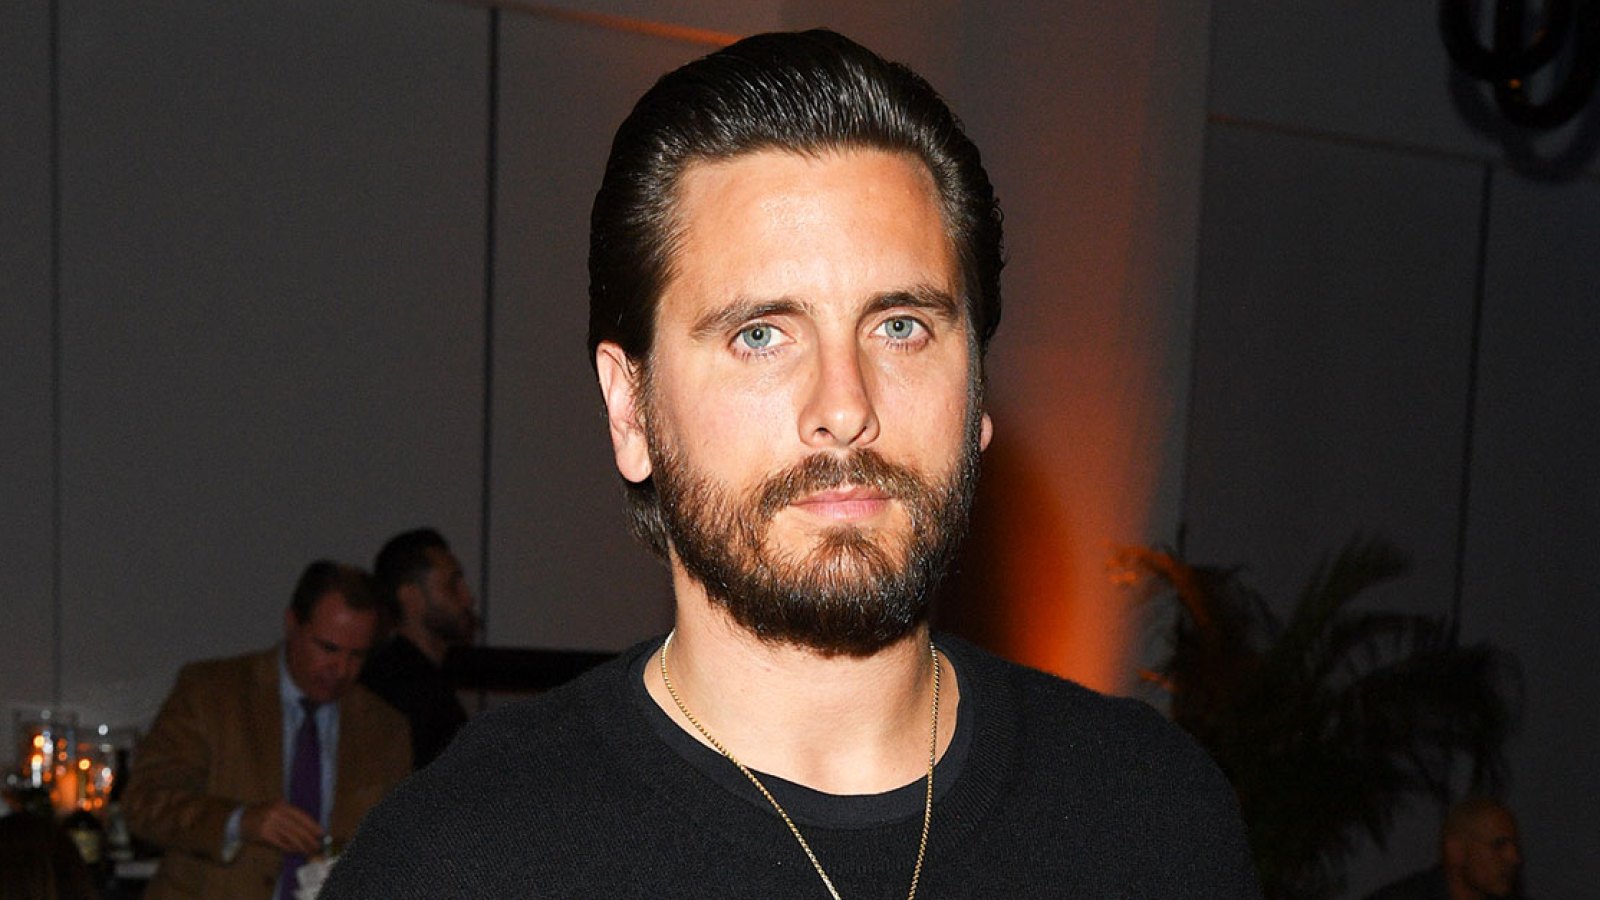 Scott Disick Shares Sweet Photo of Himself and Daughter Penelope After Posting Controversial Pic